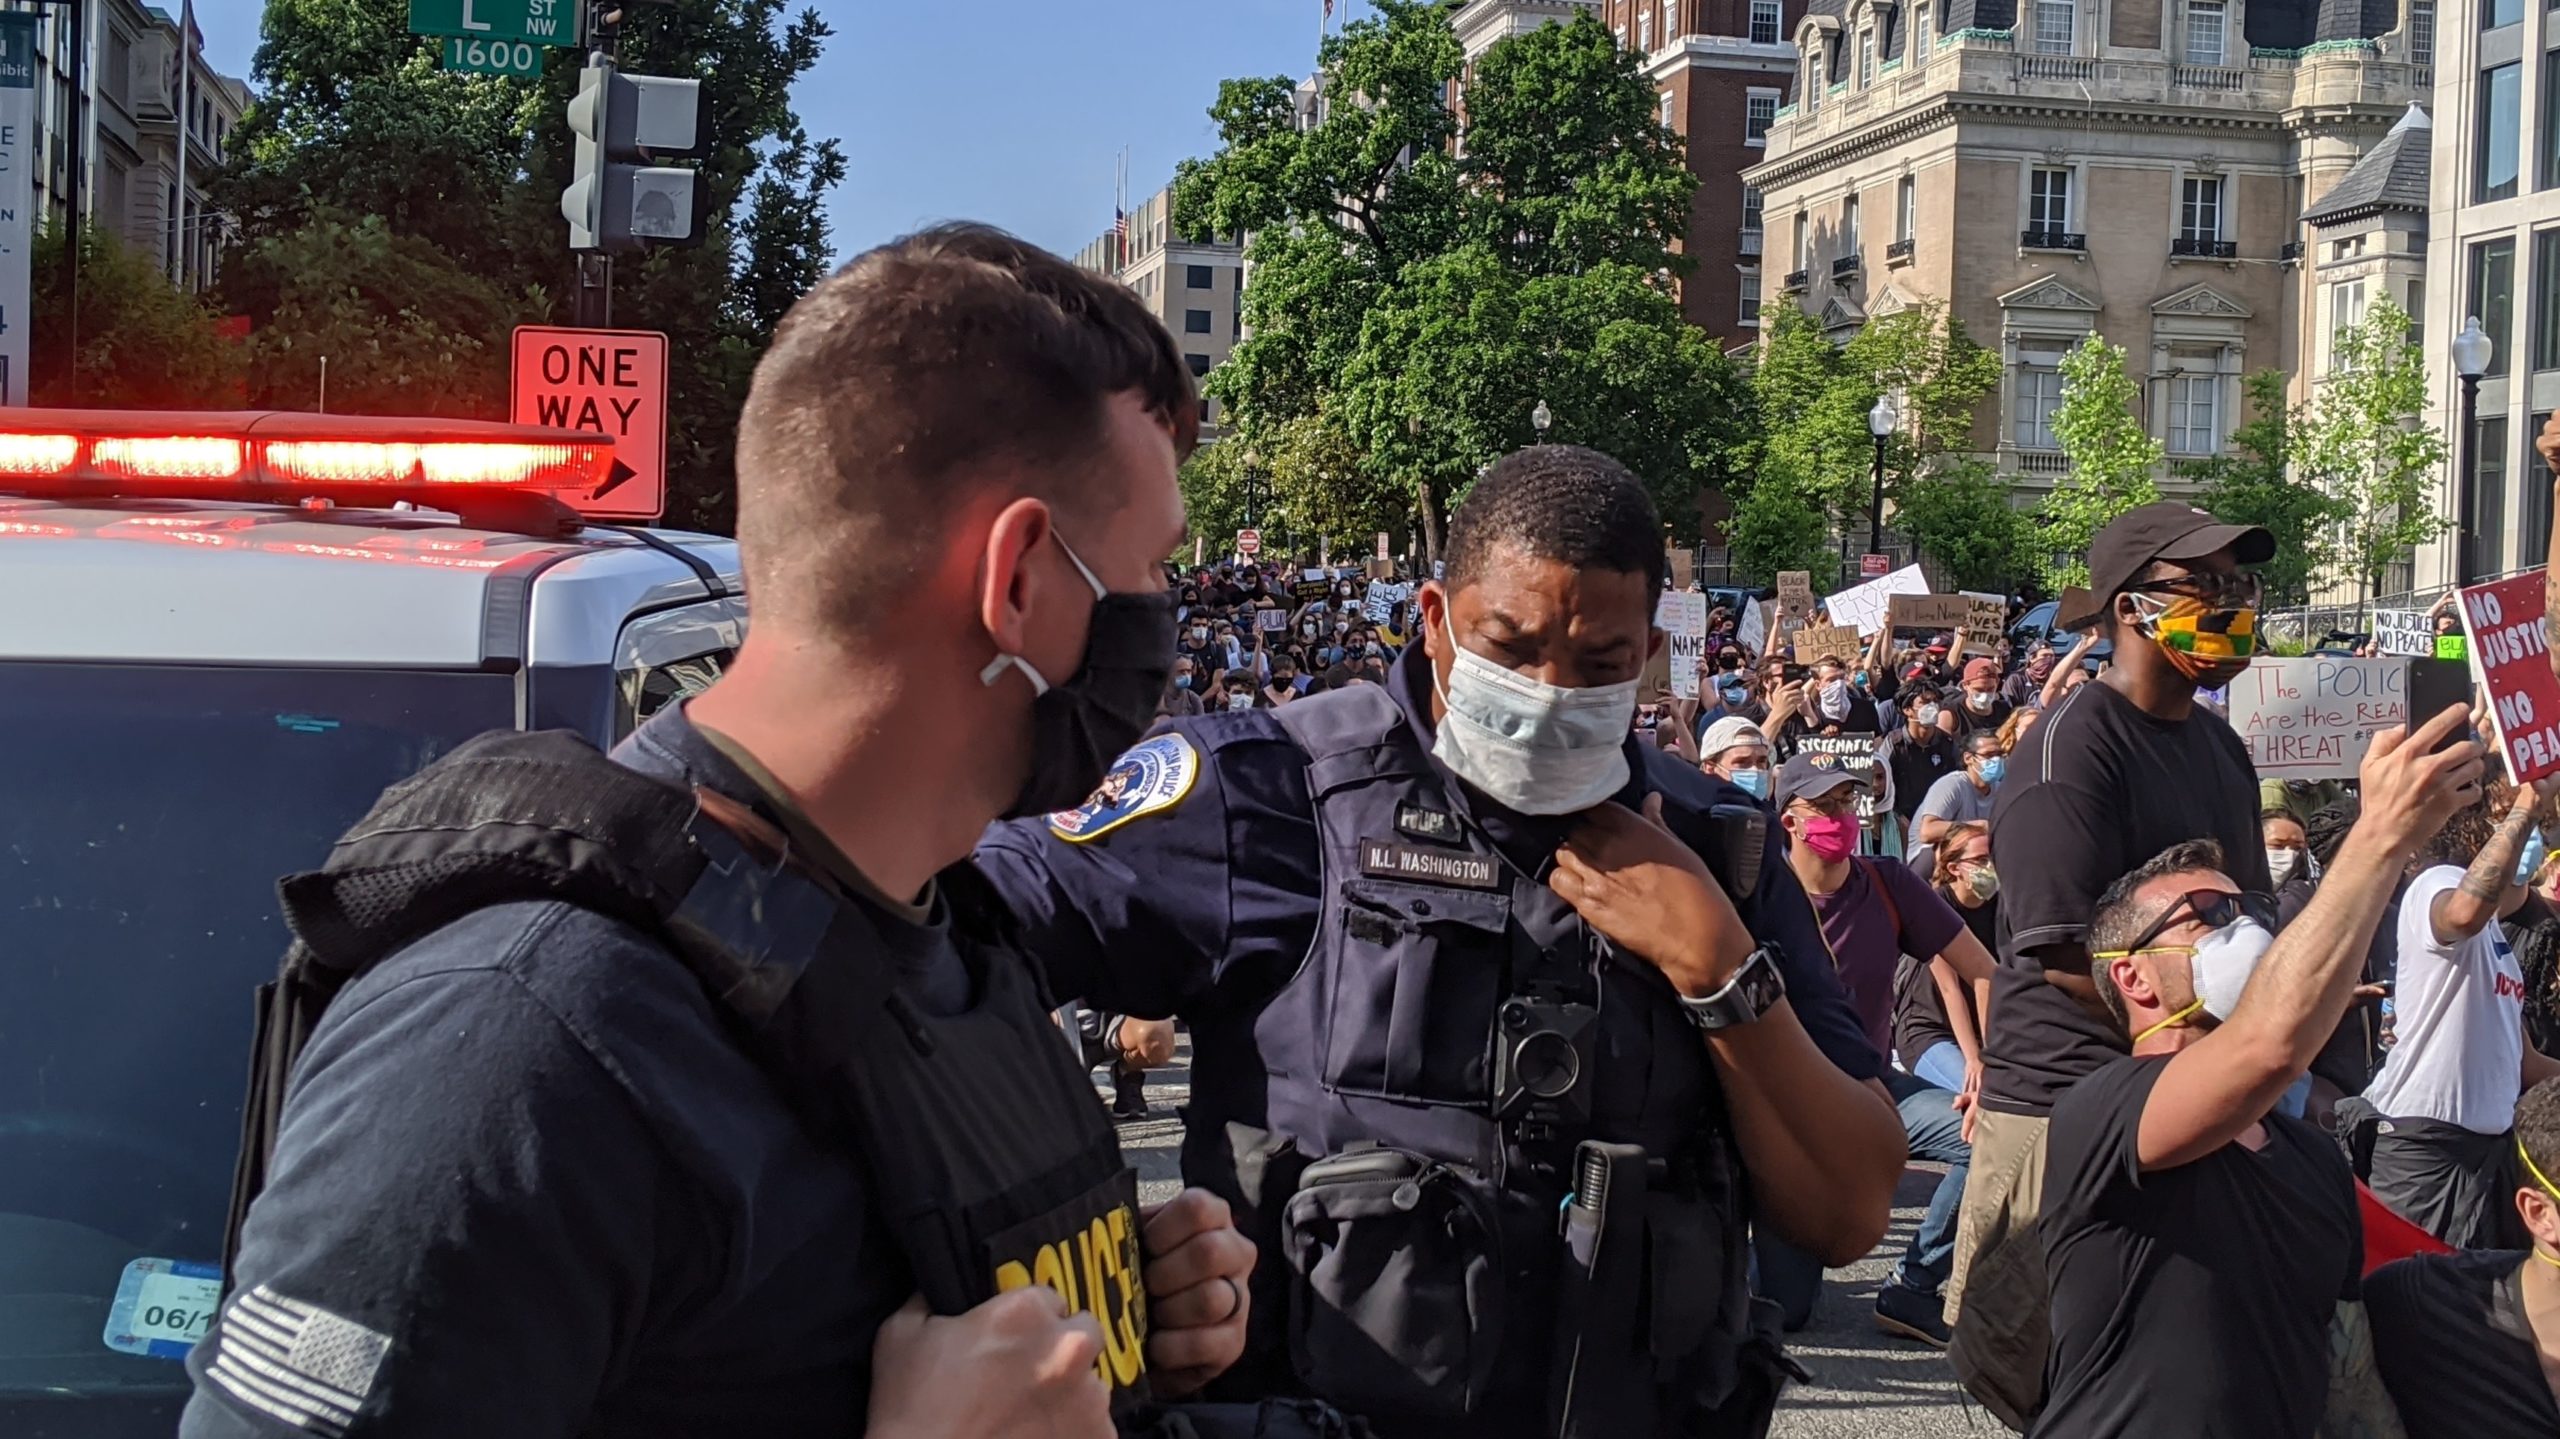 A DEA agent and another officer stationed near the White House. (Photo: Tom McKay, Gizmodo)